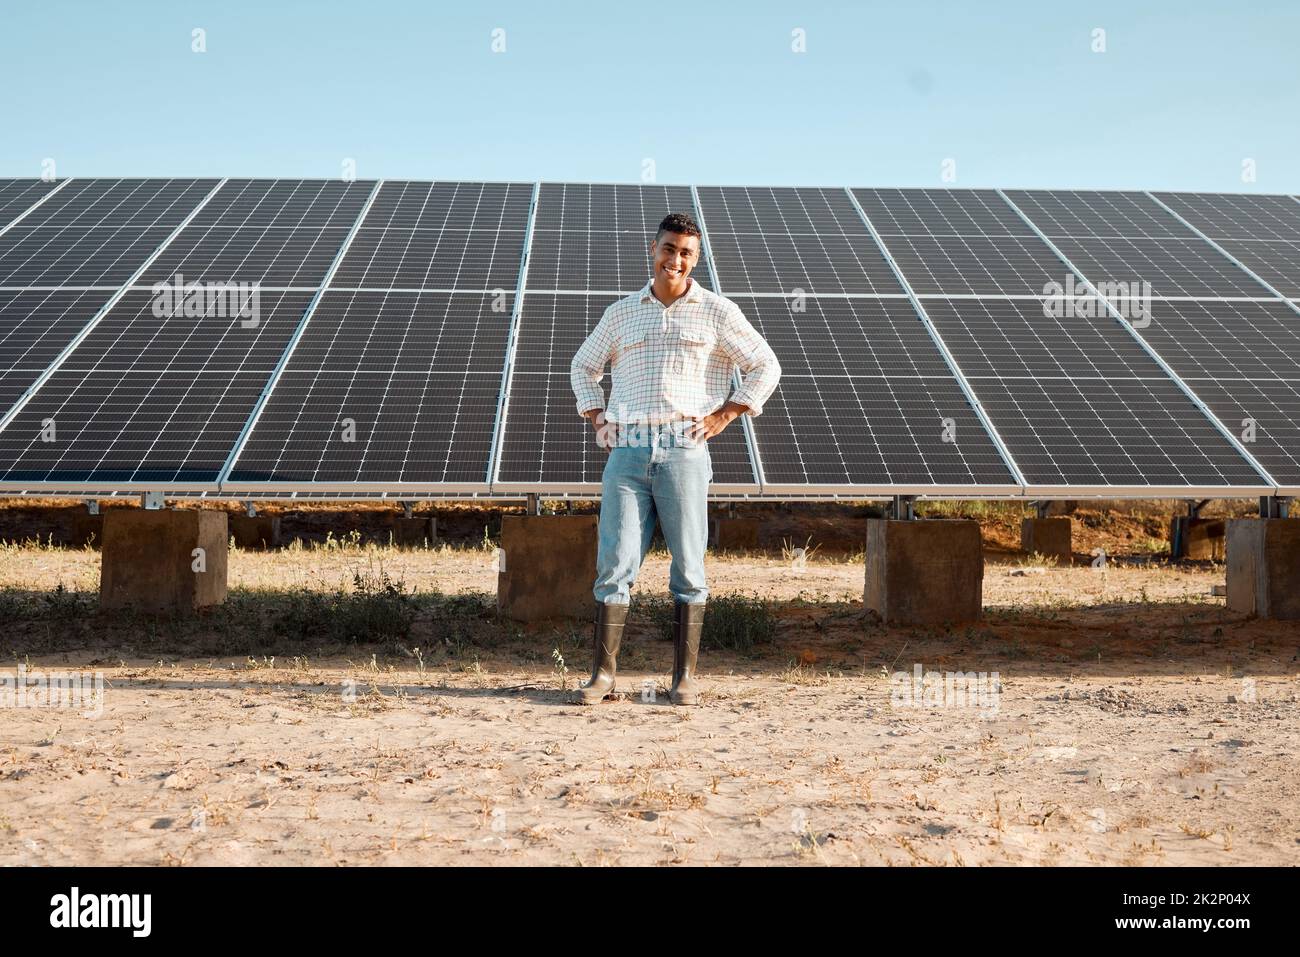 Technology making farming easier. Shot of a young man standing next to a solar panel on a farm. Stock Photo